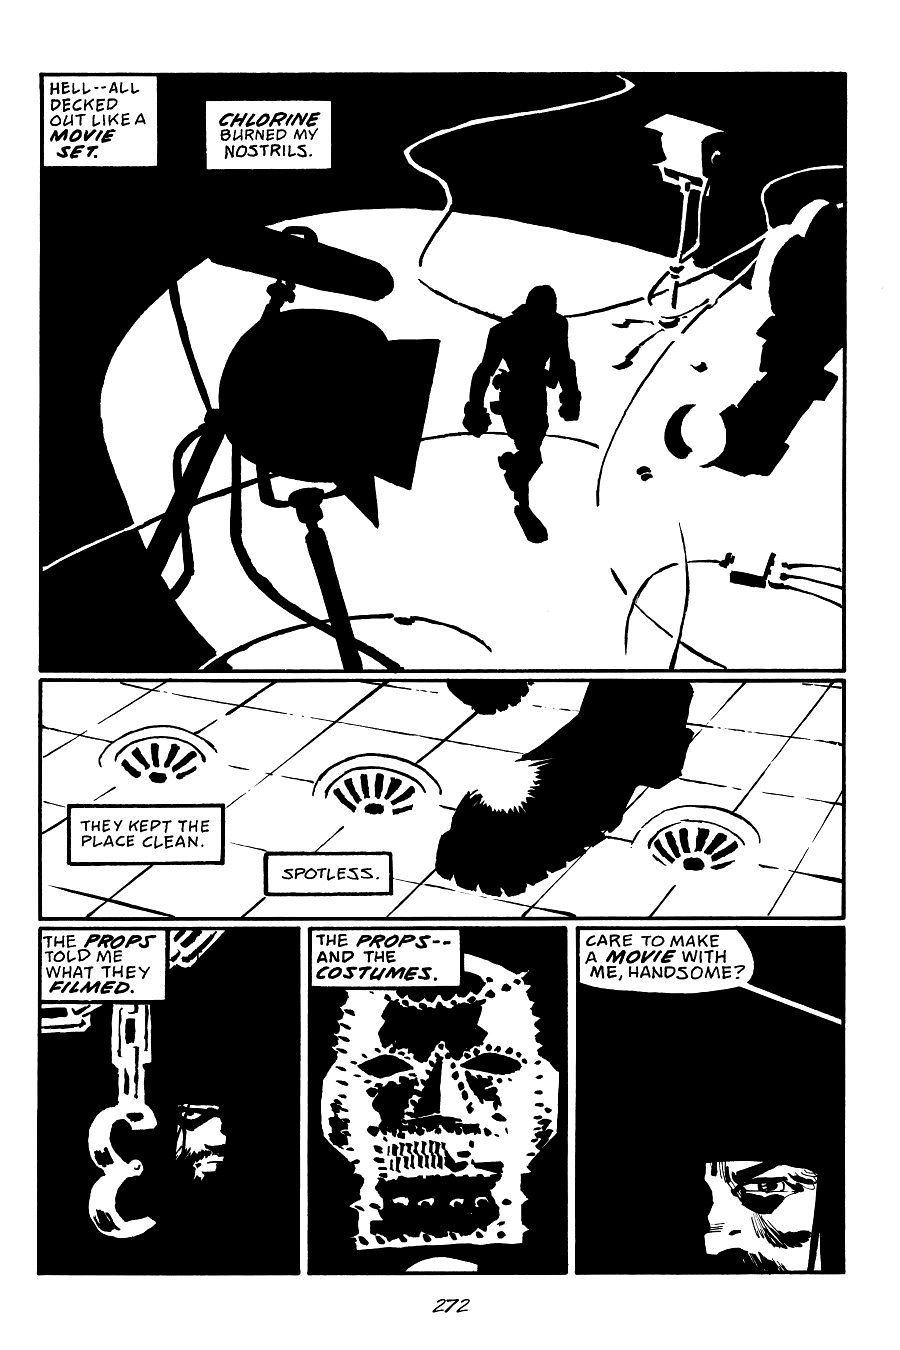 page 272 of sin city 7 hell and back